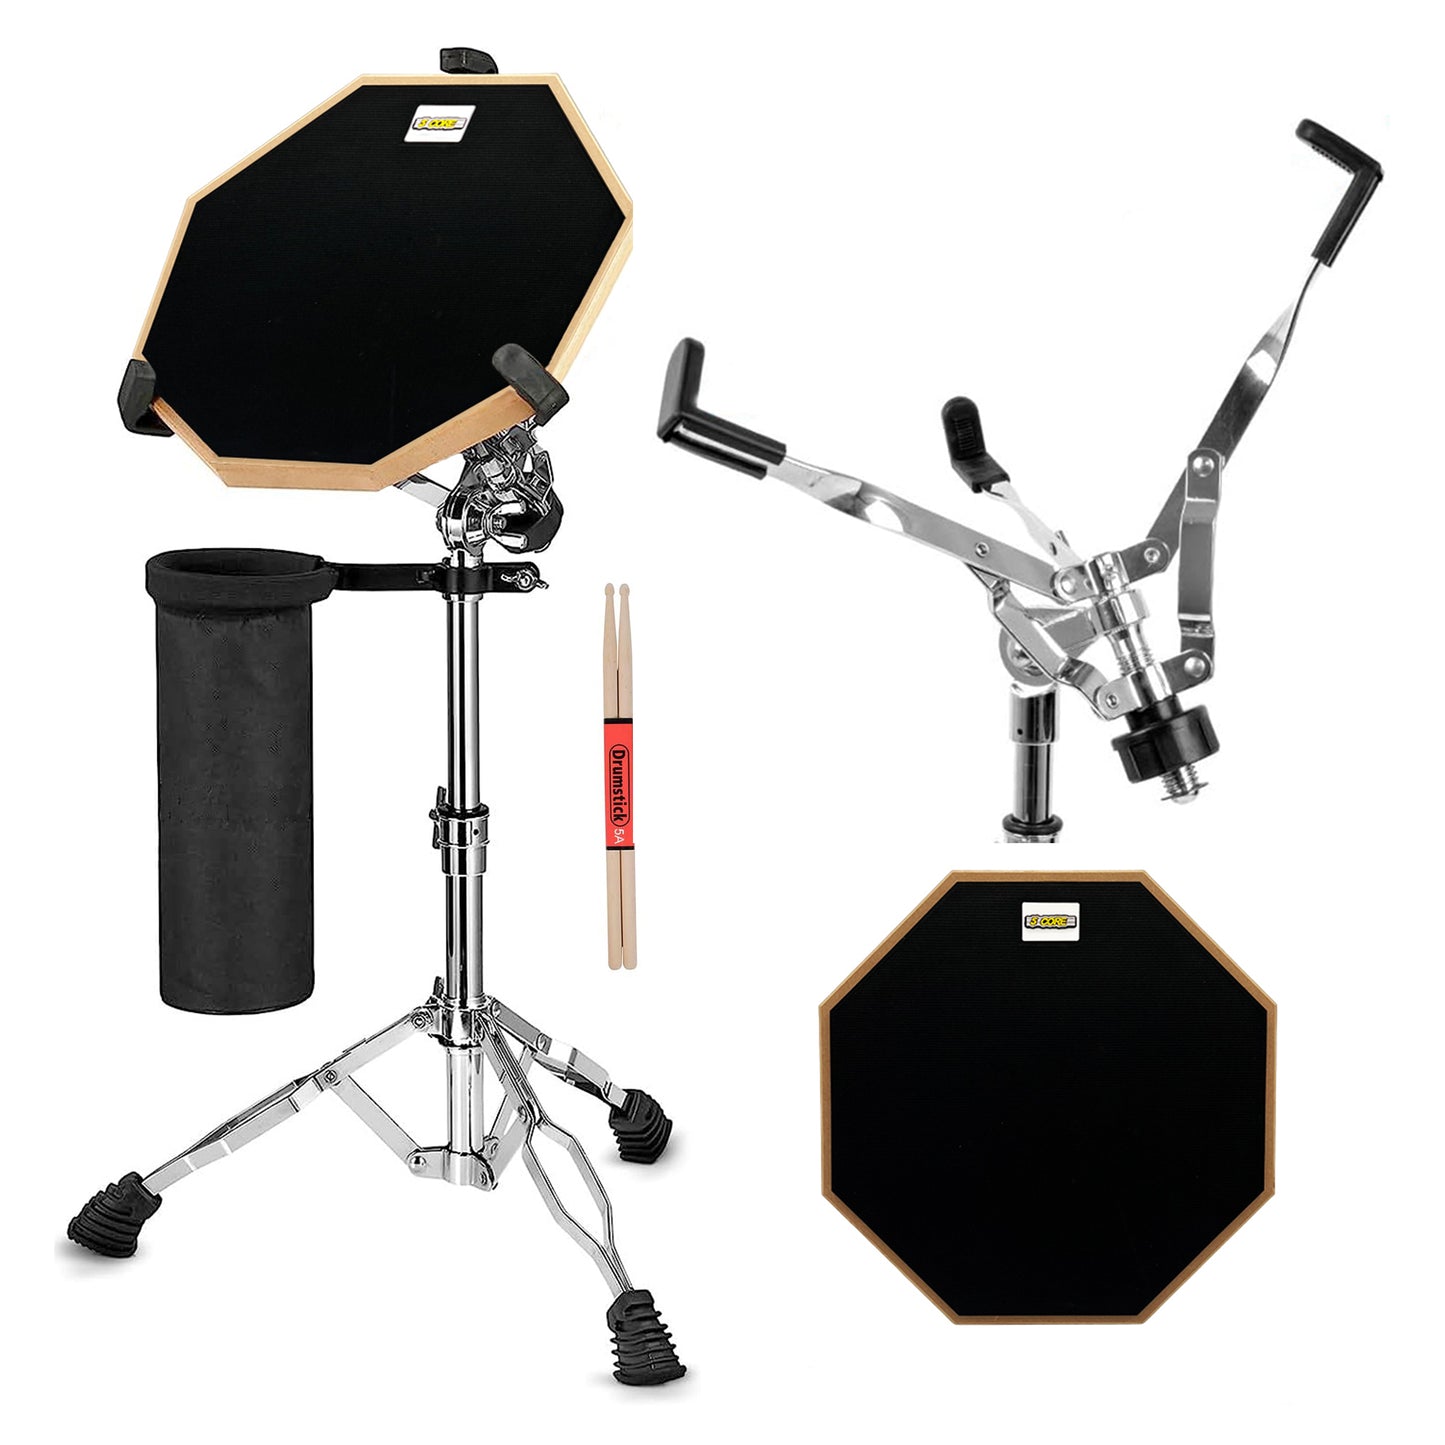 5 Core Drum Practice Pad with Snare Drum Stand Black/ Foldable Drum Pad Set/ Adjustable Drum Stand with Double Sided Silent Practice Pad Kit with Drum Sticks, Drumstick Holder- DPAD COMBO